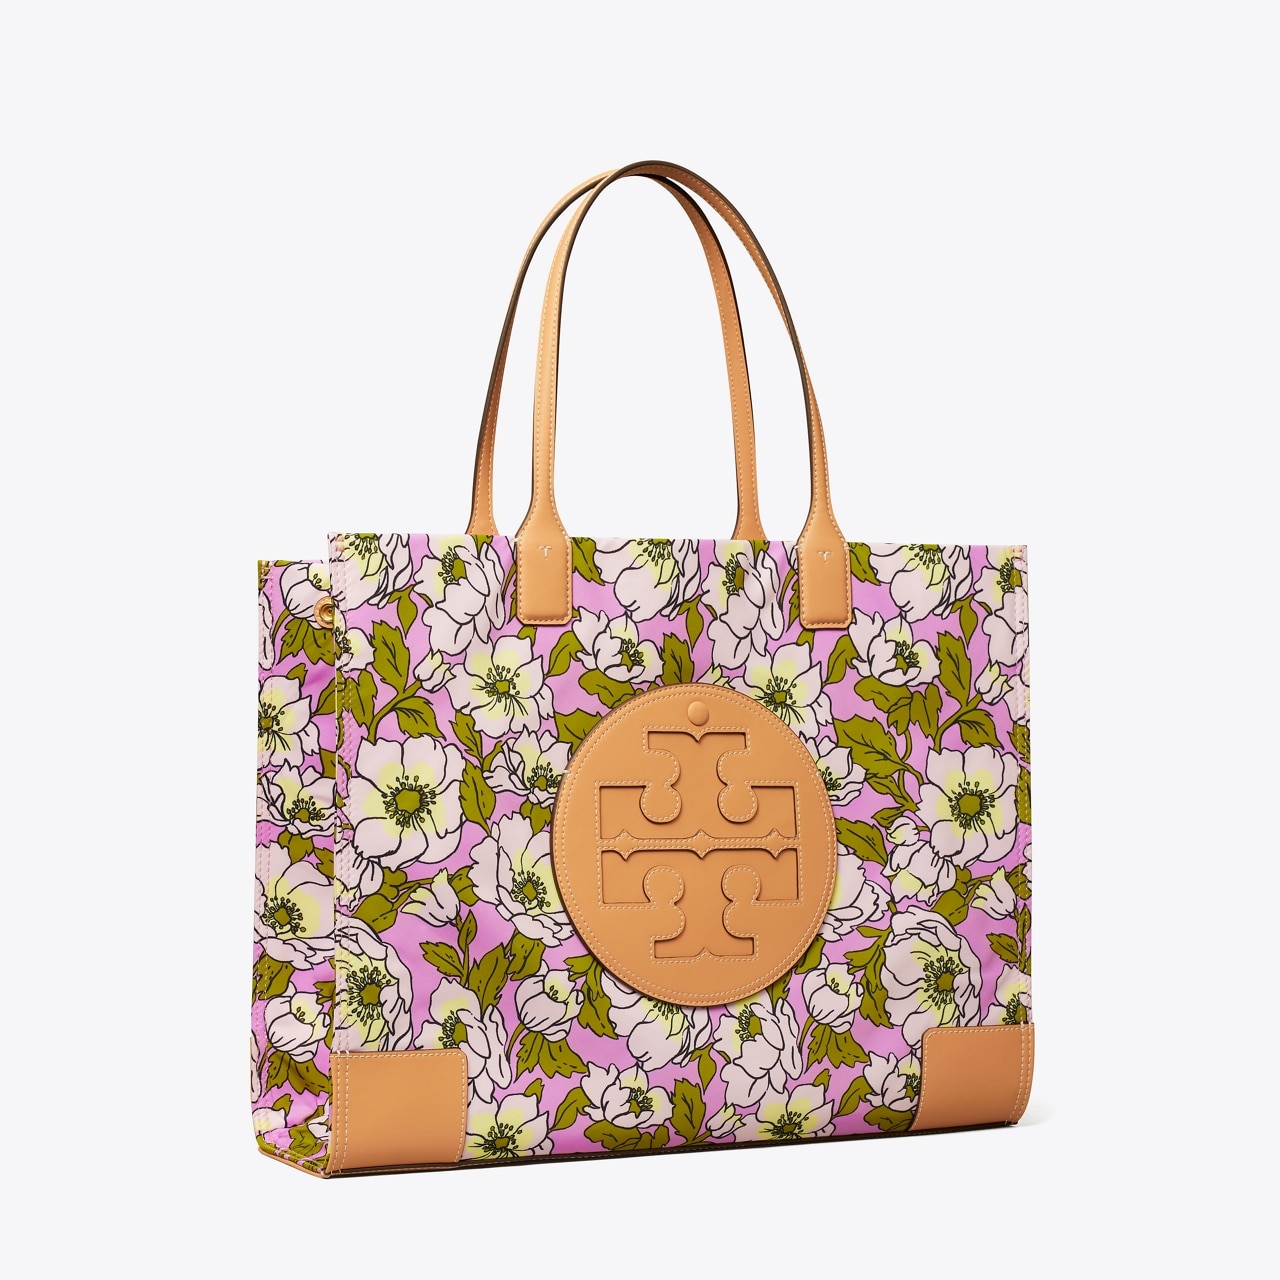 Tory Burch Pink Floral Print Nylon and Leather Ella Tote Tory